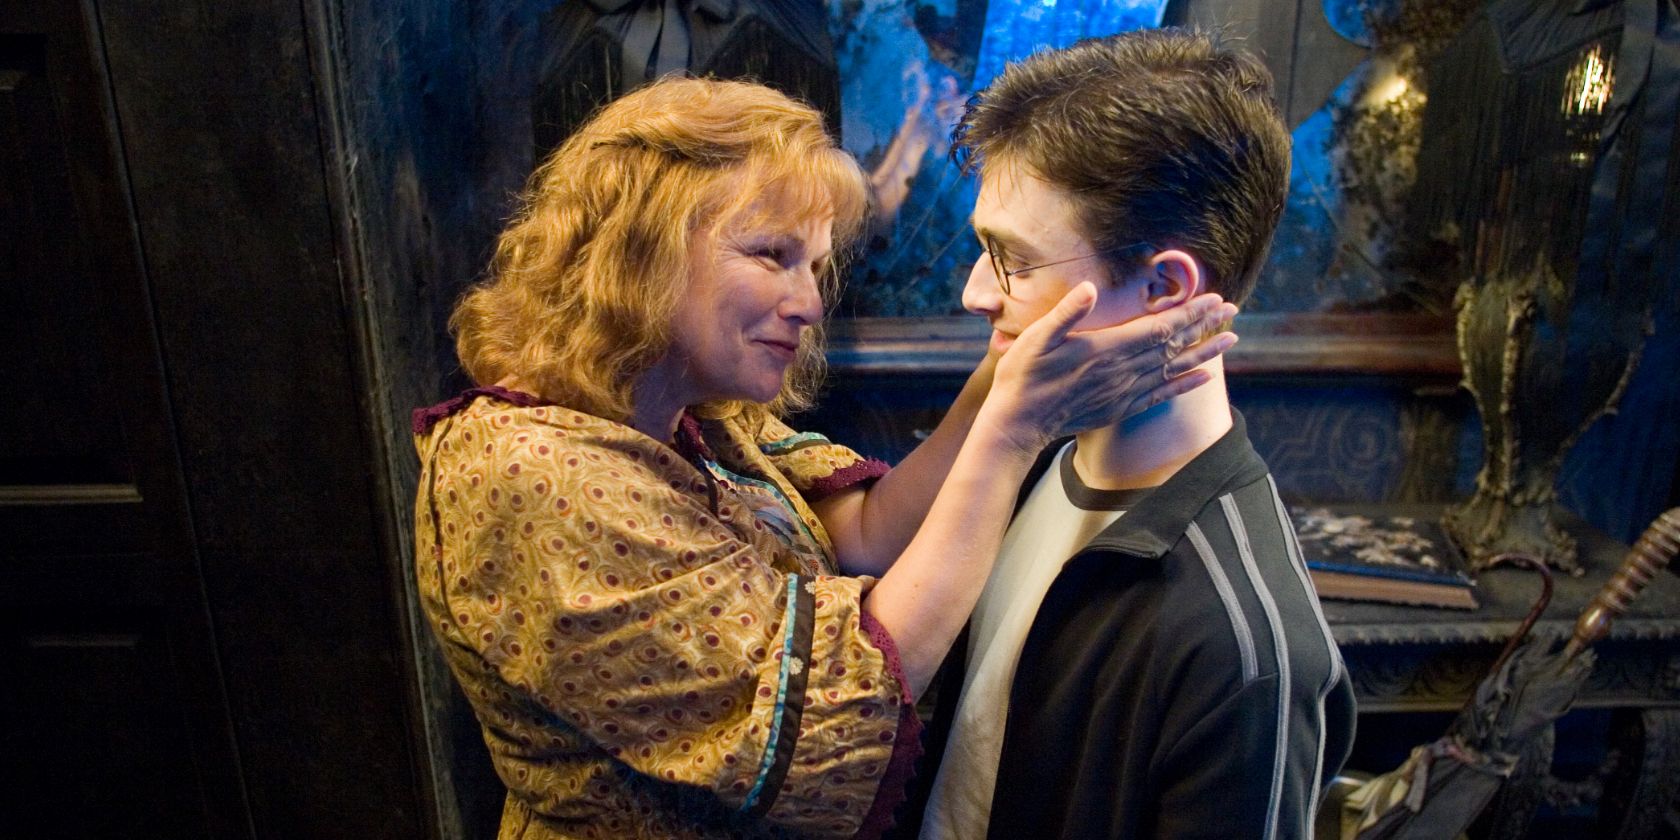 Molly holding Harry's face affectionately in Harry Potter and the Order of the Phoenix.